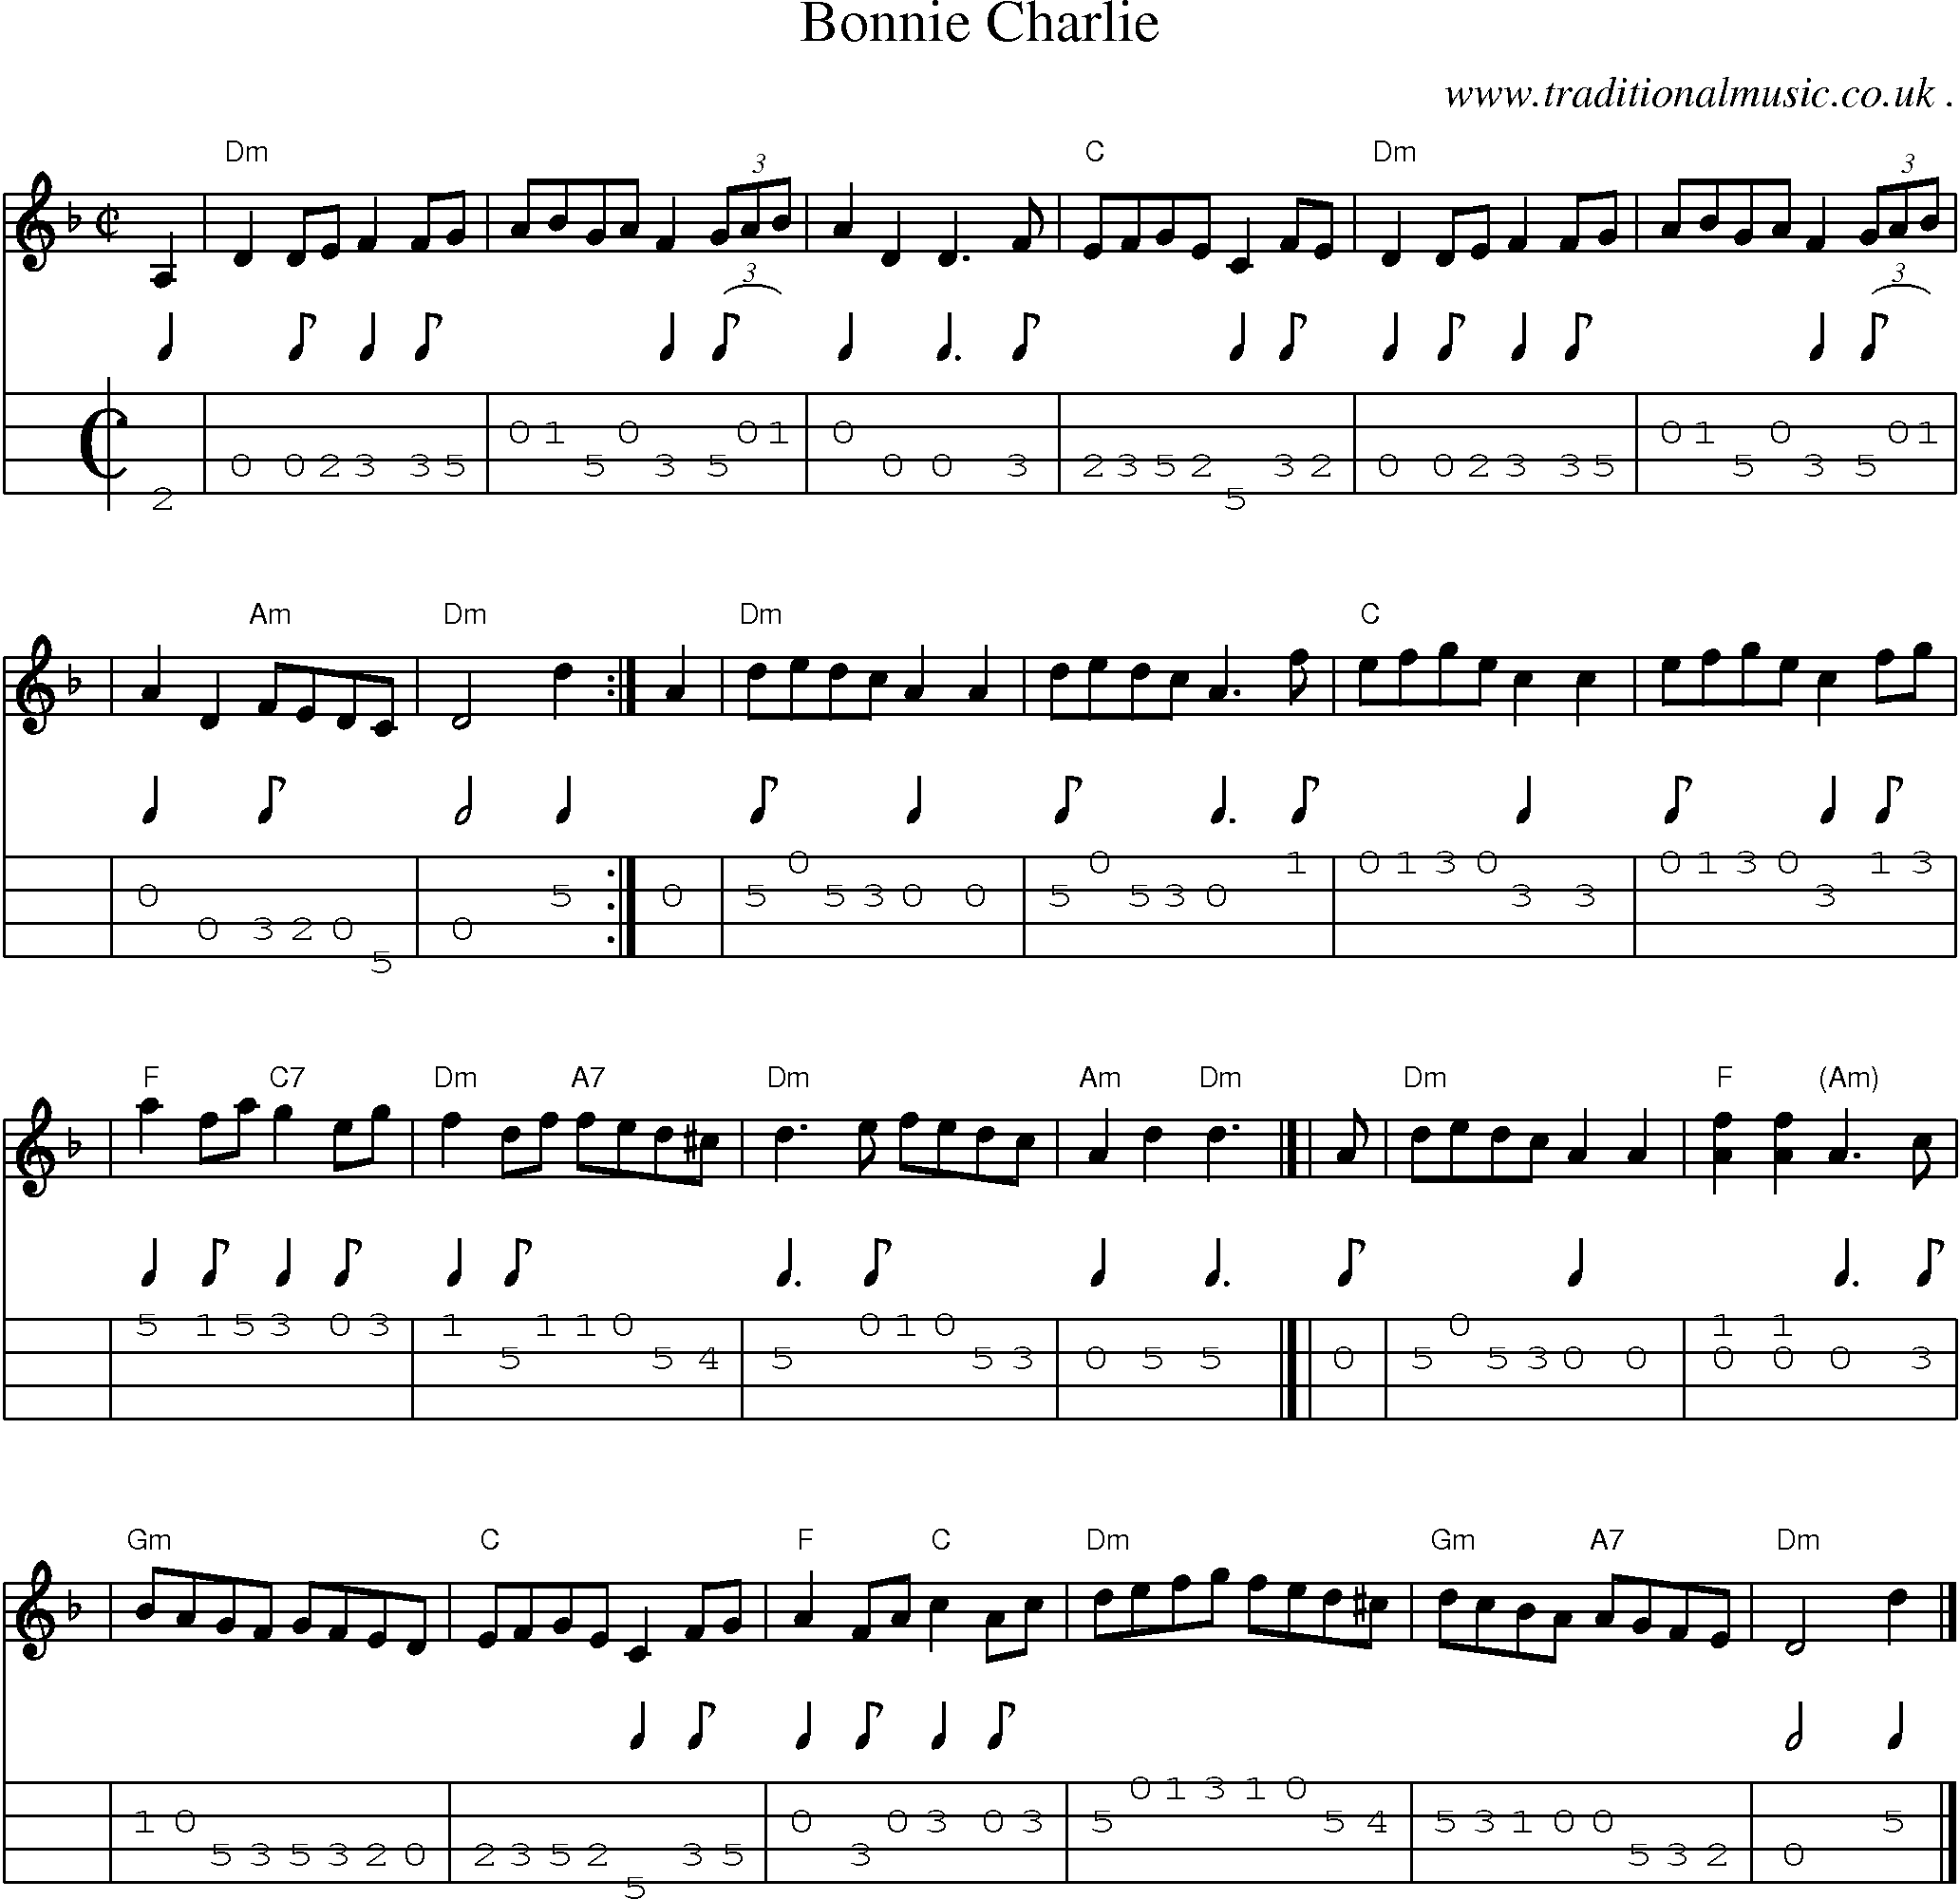 Sheet-music  score, Chords and Mandolin Tabs for Bonnie Charlie